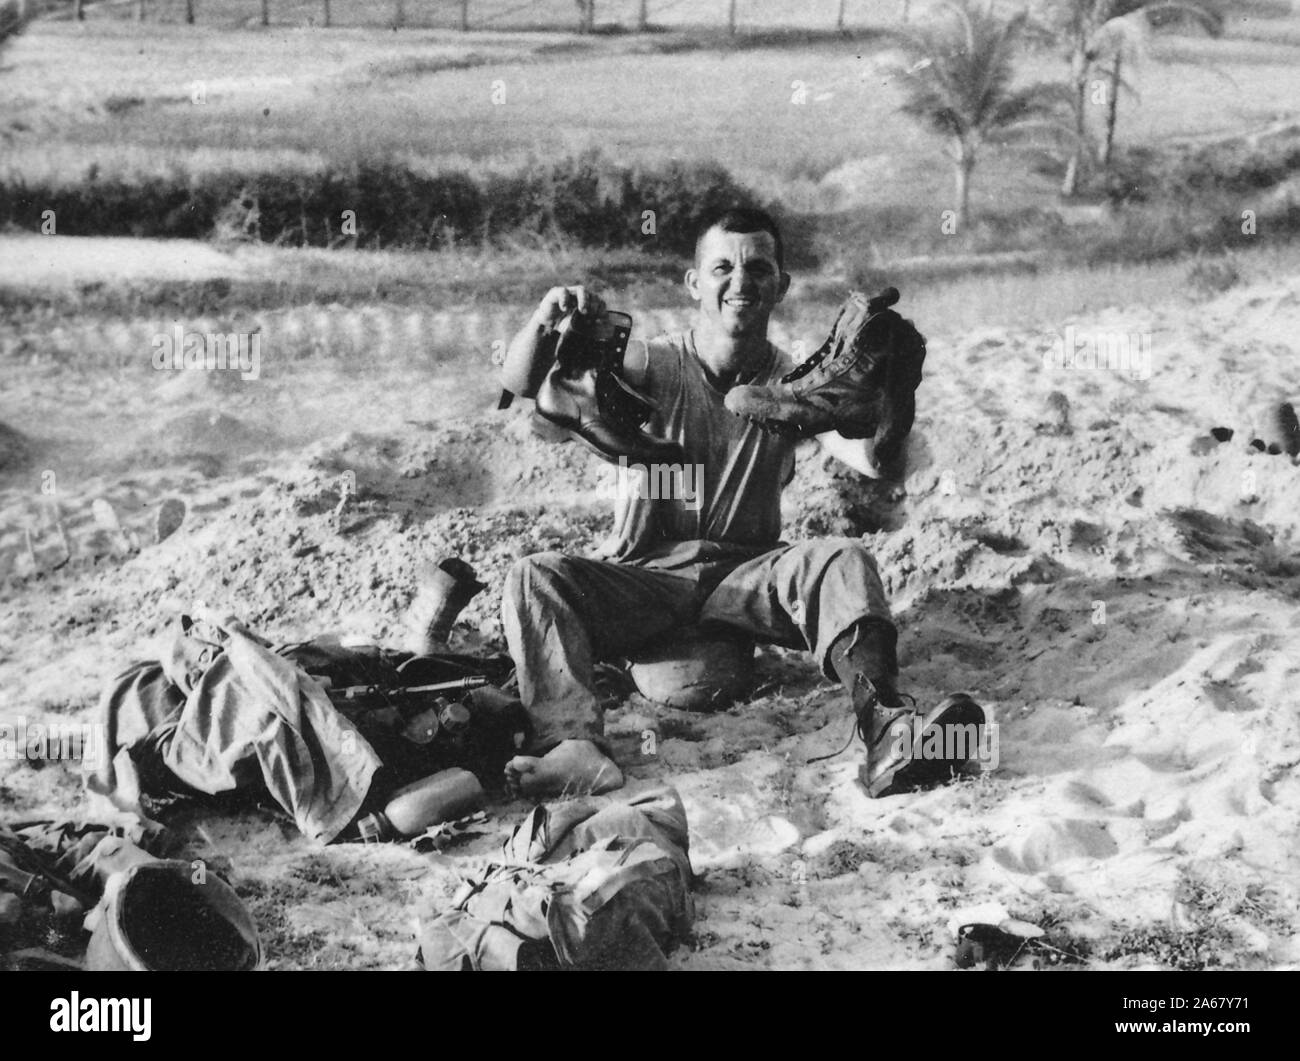 An American serviceman sits outside on a sandy hillside on a sunny day, making a face at the camera, while holding up a new boot in one hand and an old boot in the other, Vietnam, 1965. () Stock Photo